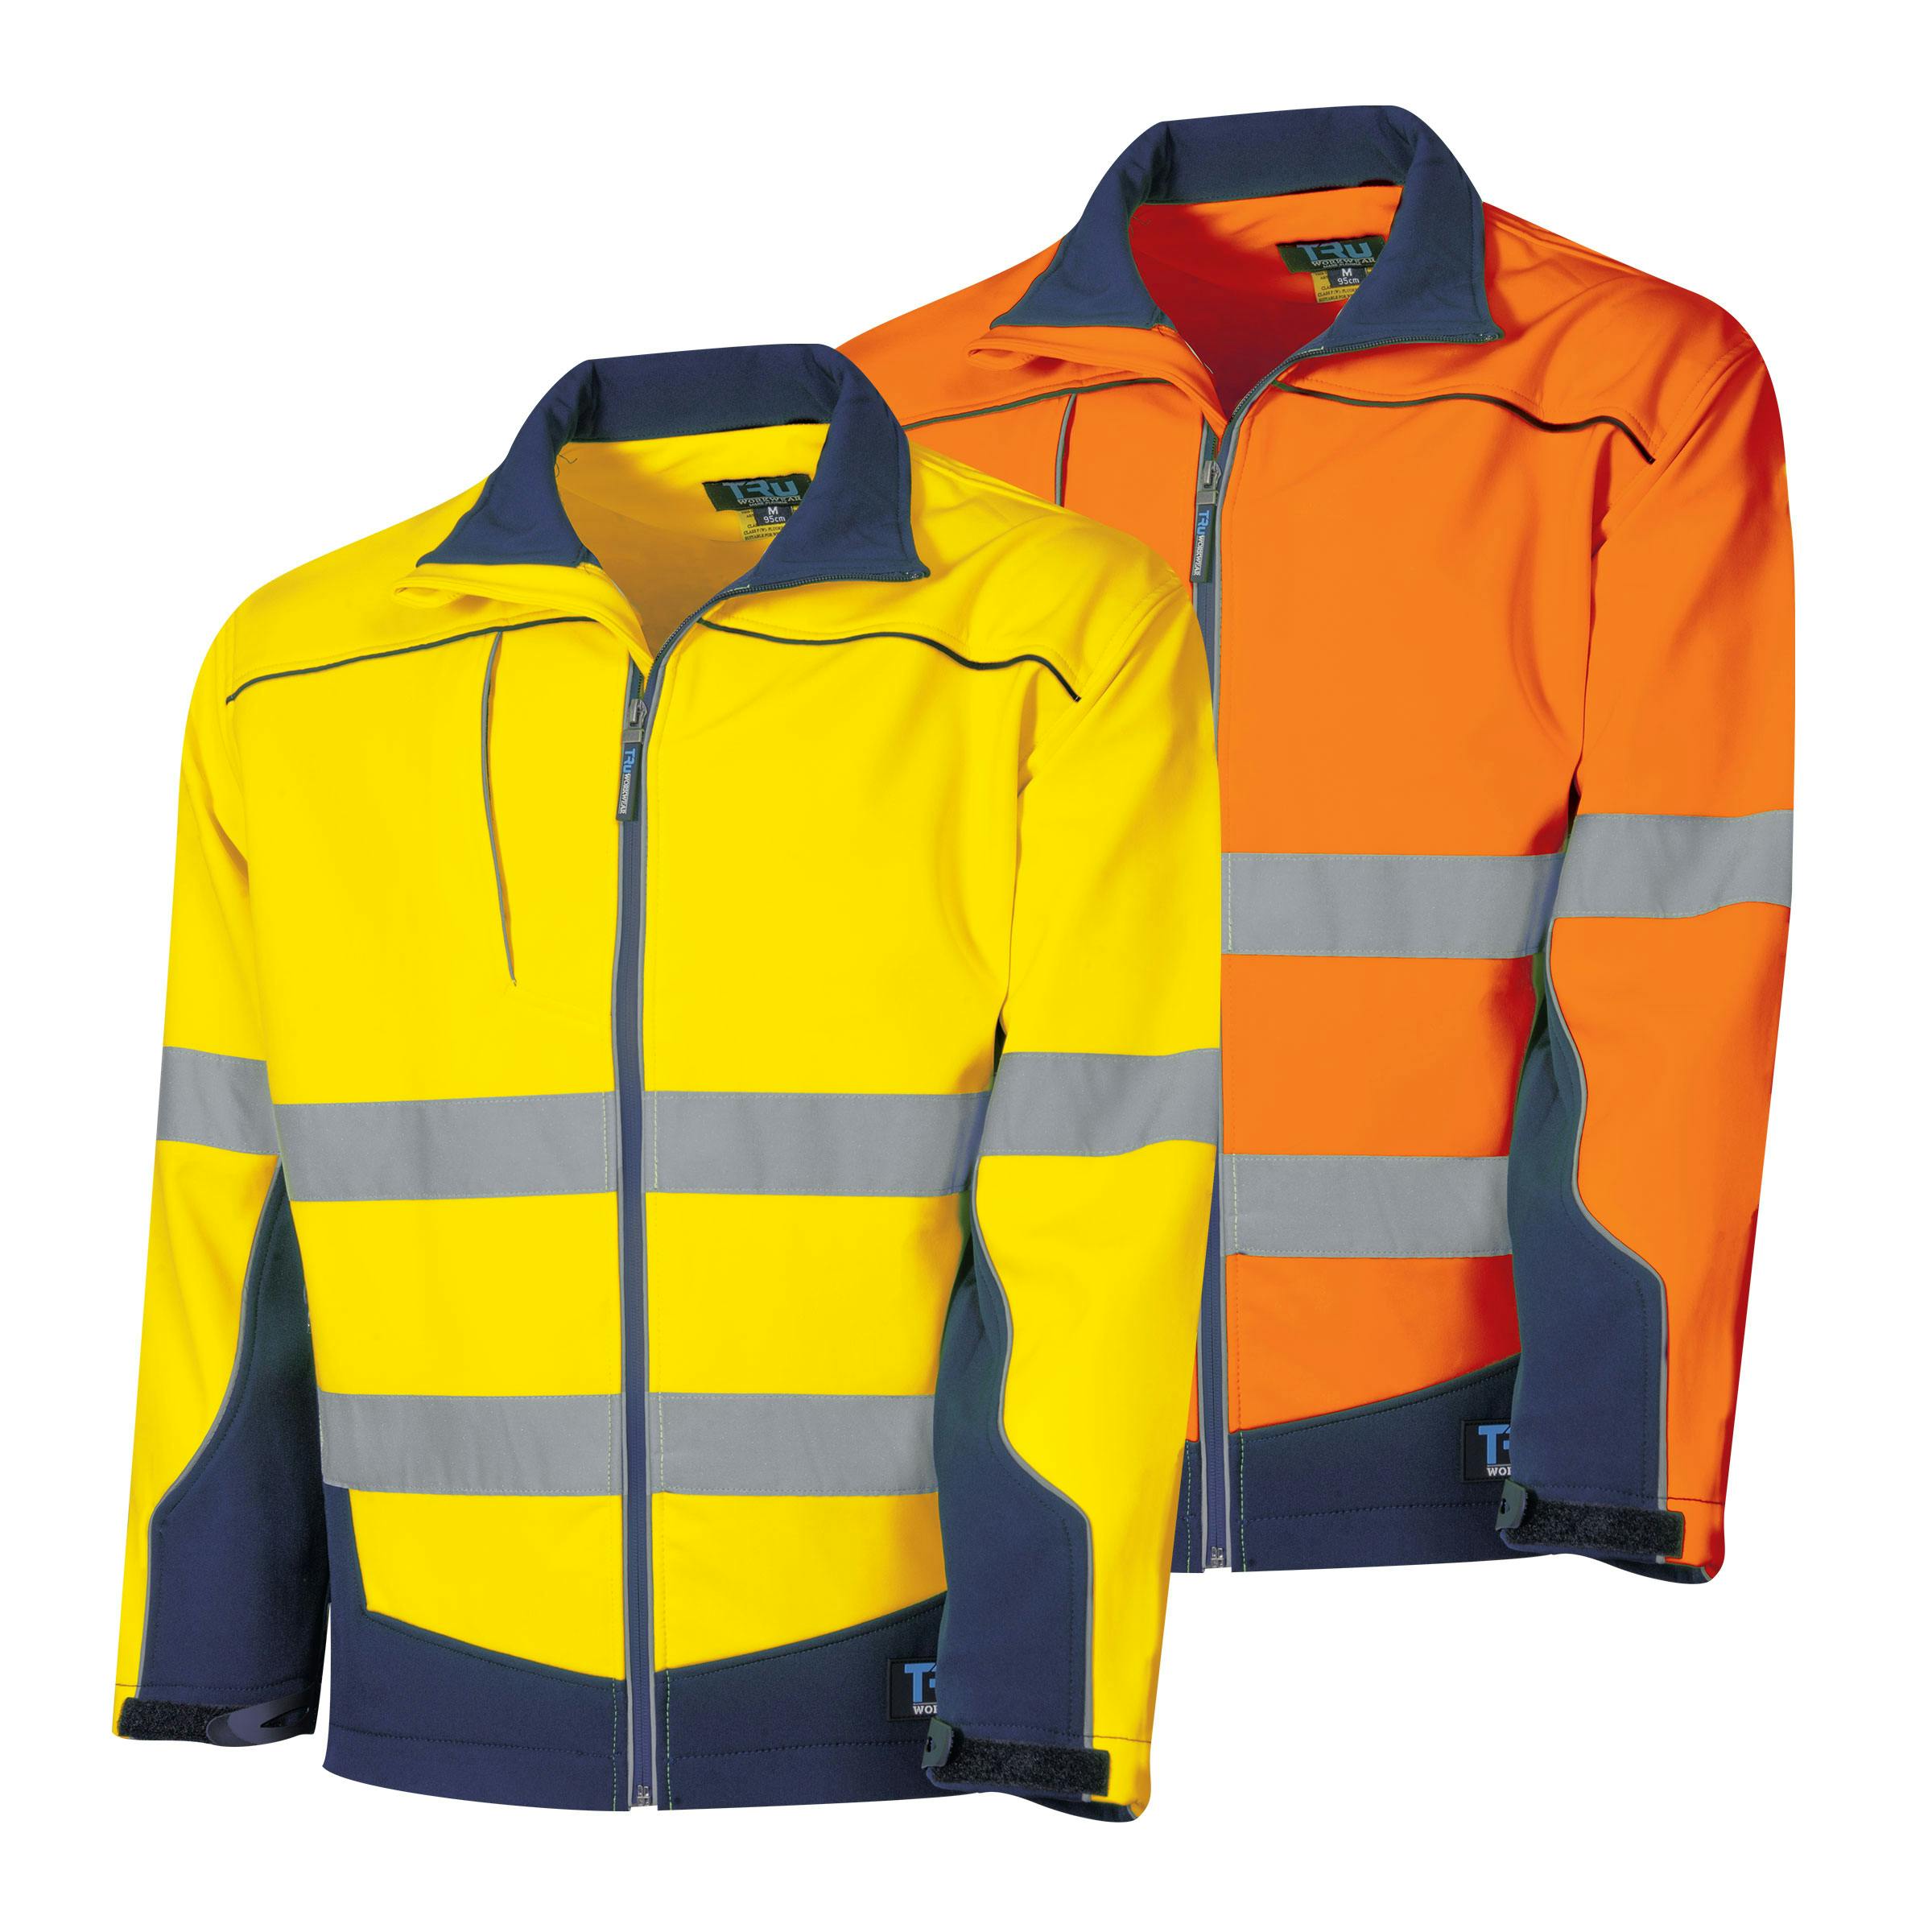 TRu Workwear Soft Shell Jacket 2 Tone 94% Polyester 6% Spandex With Piping And Tru Reflective Tape